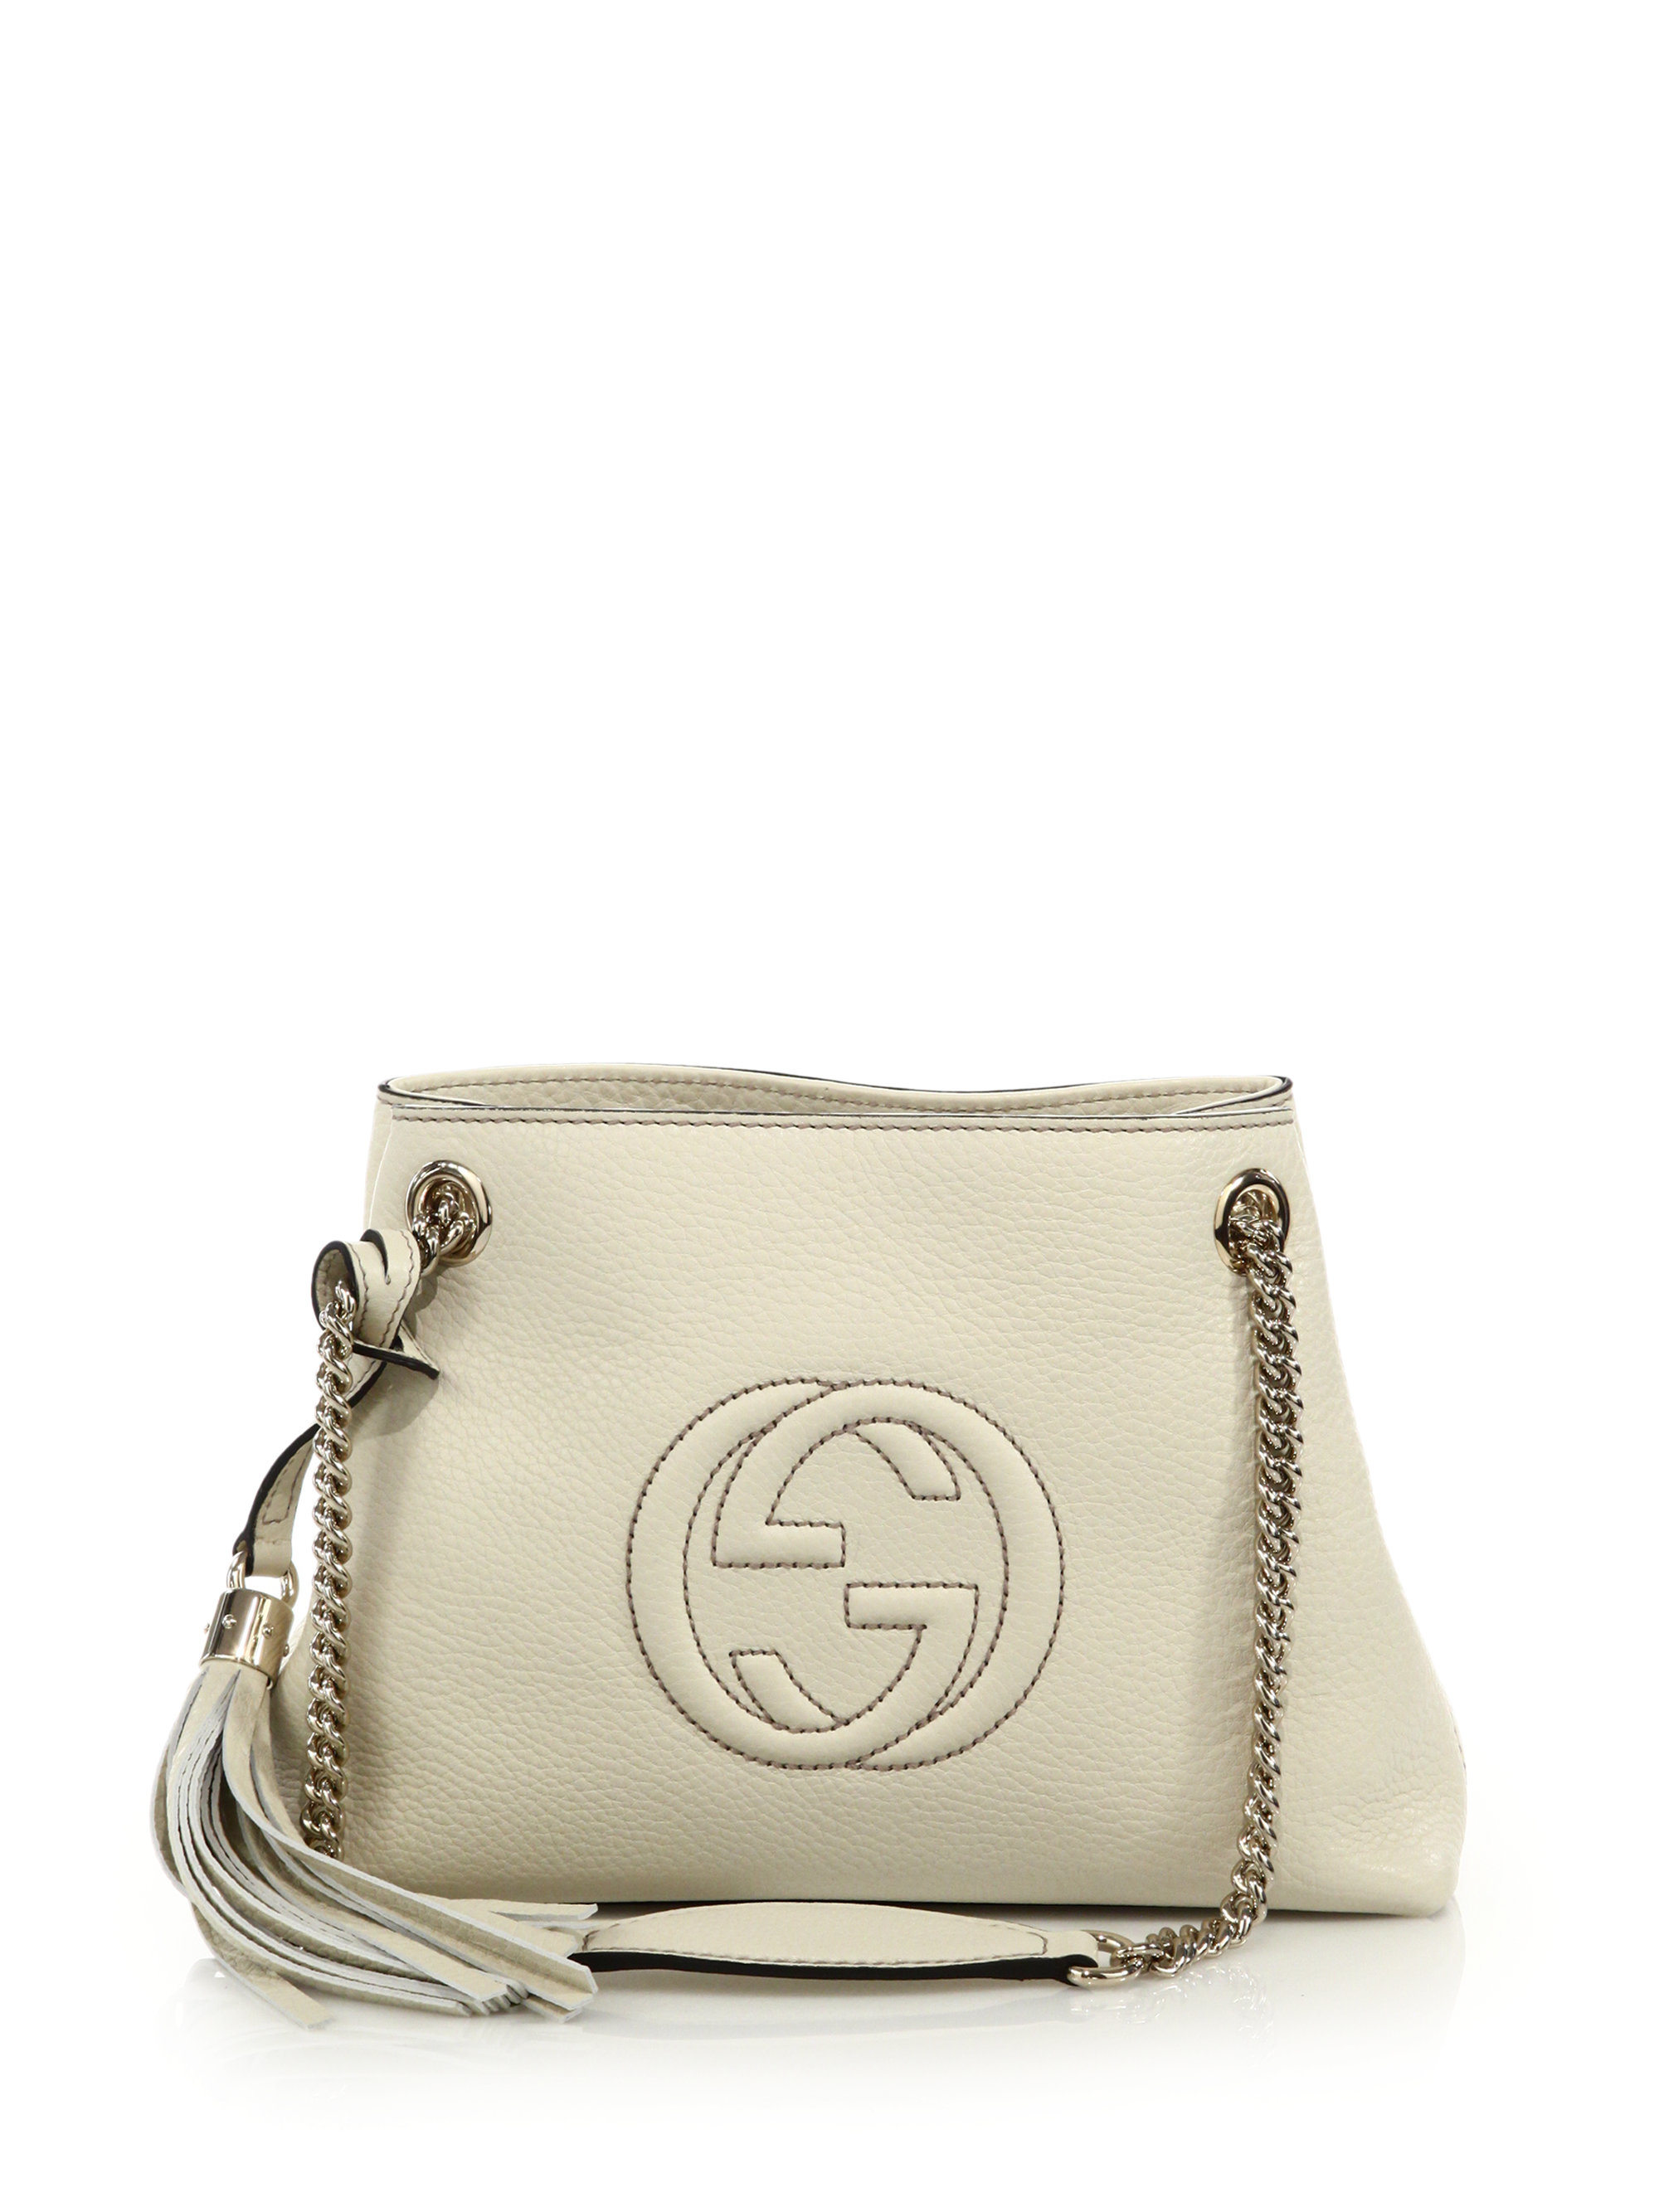 Gucci Soho Small Leather Shoulder Bag in White - Lyst